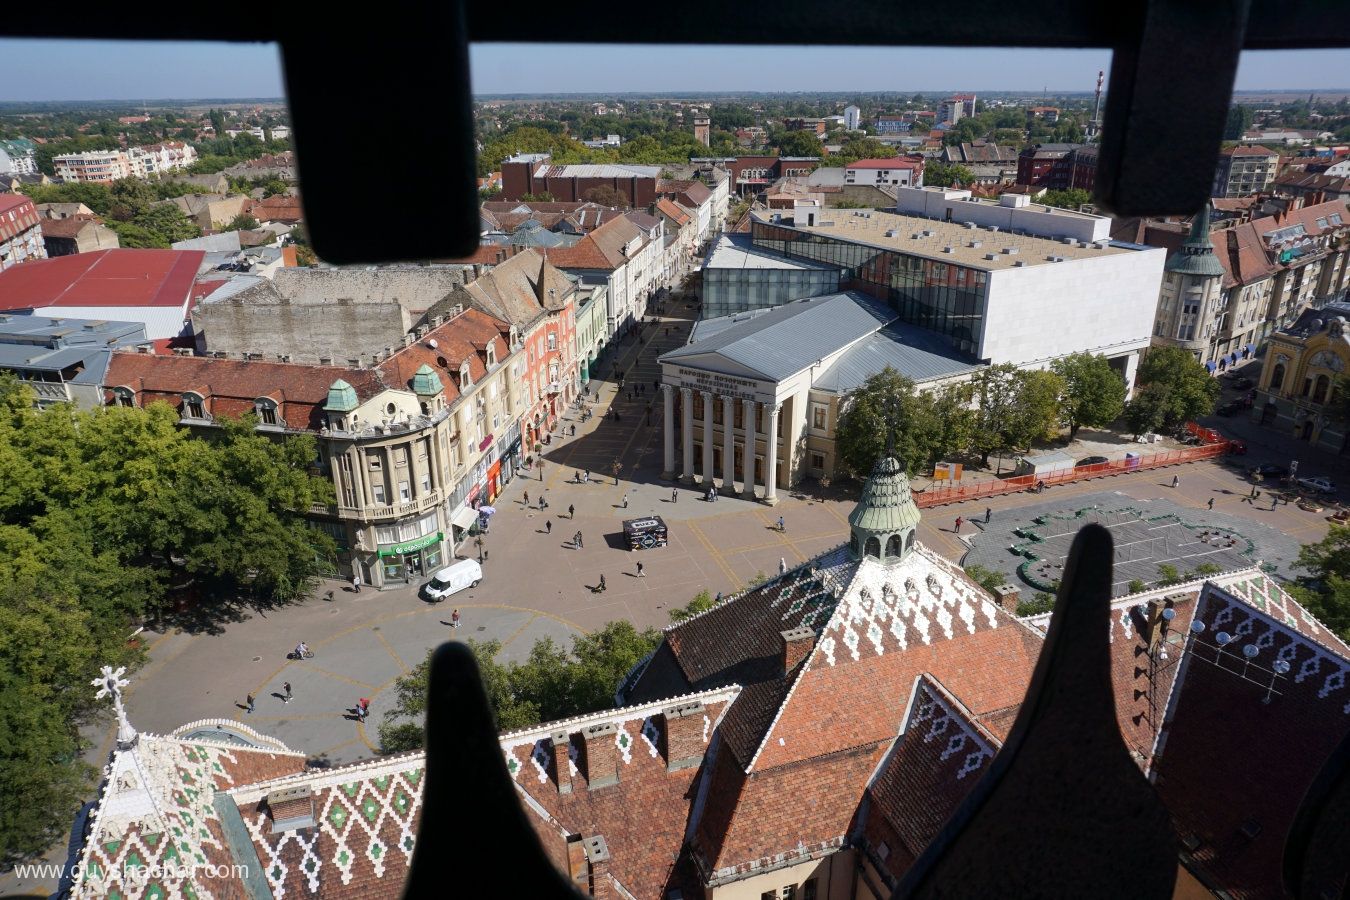 City Hall - View from the clock tower